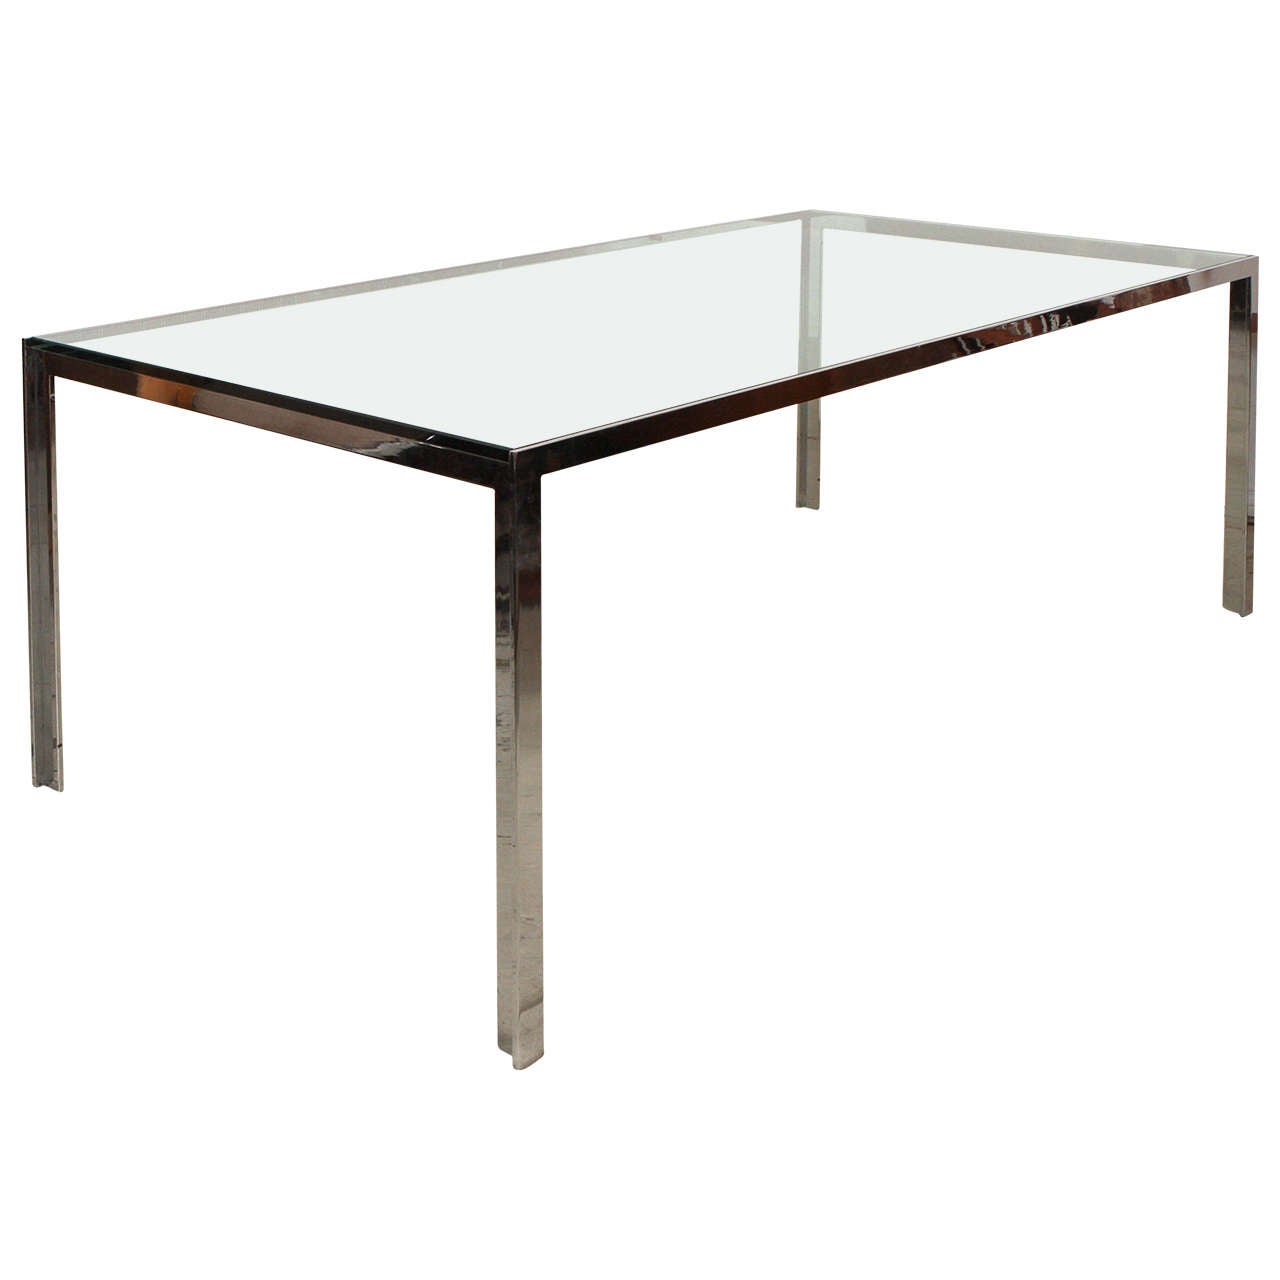 Gerald McCabe Series "T" Dining Table For Sale